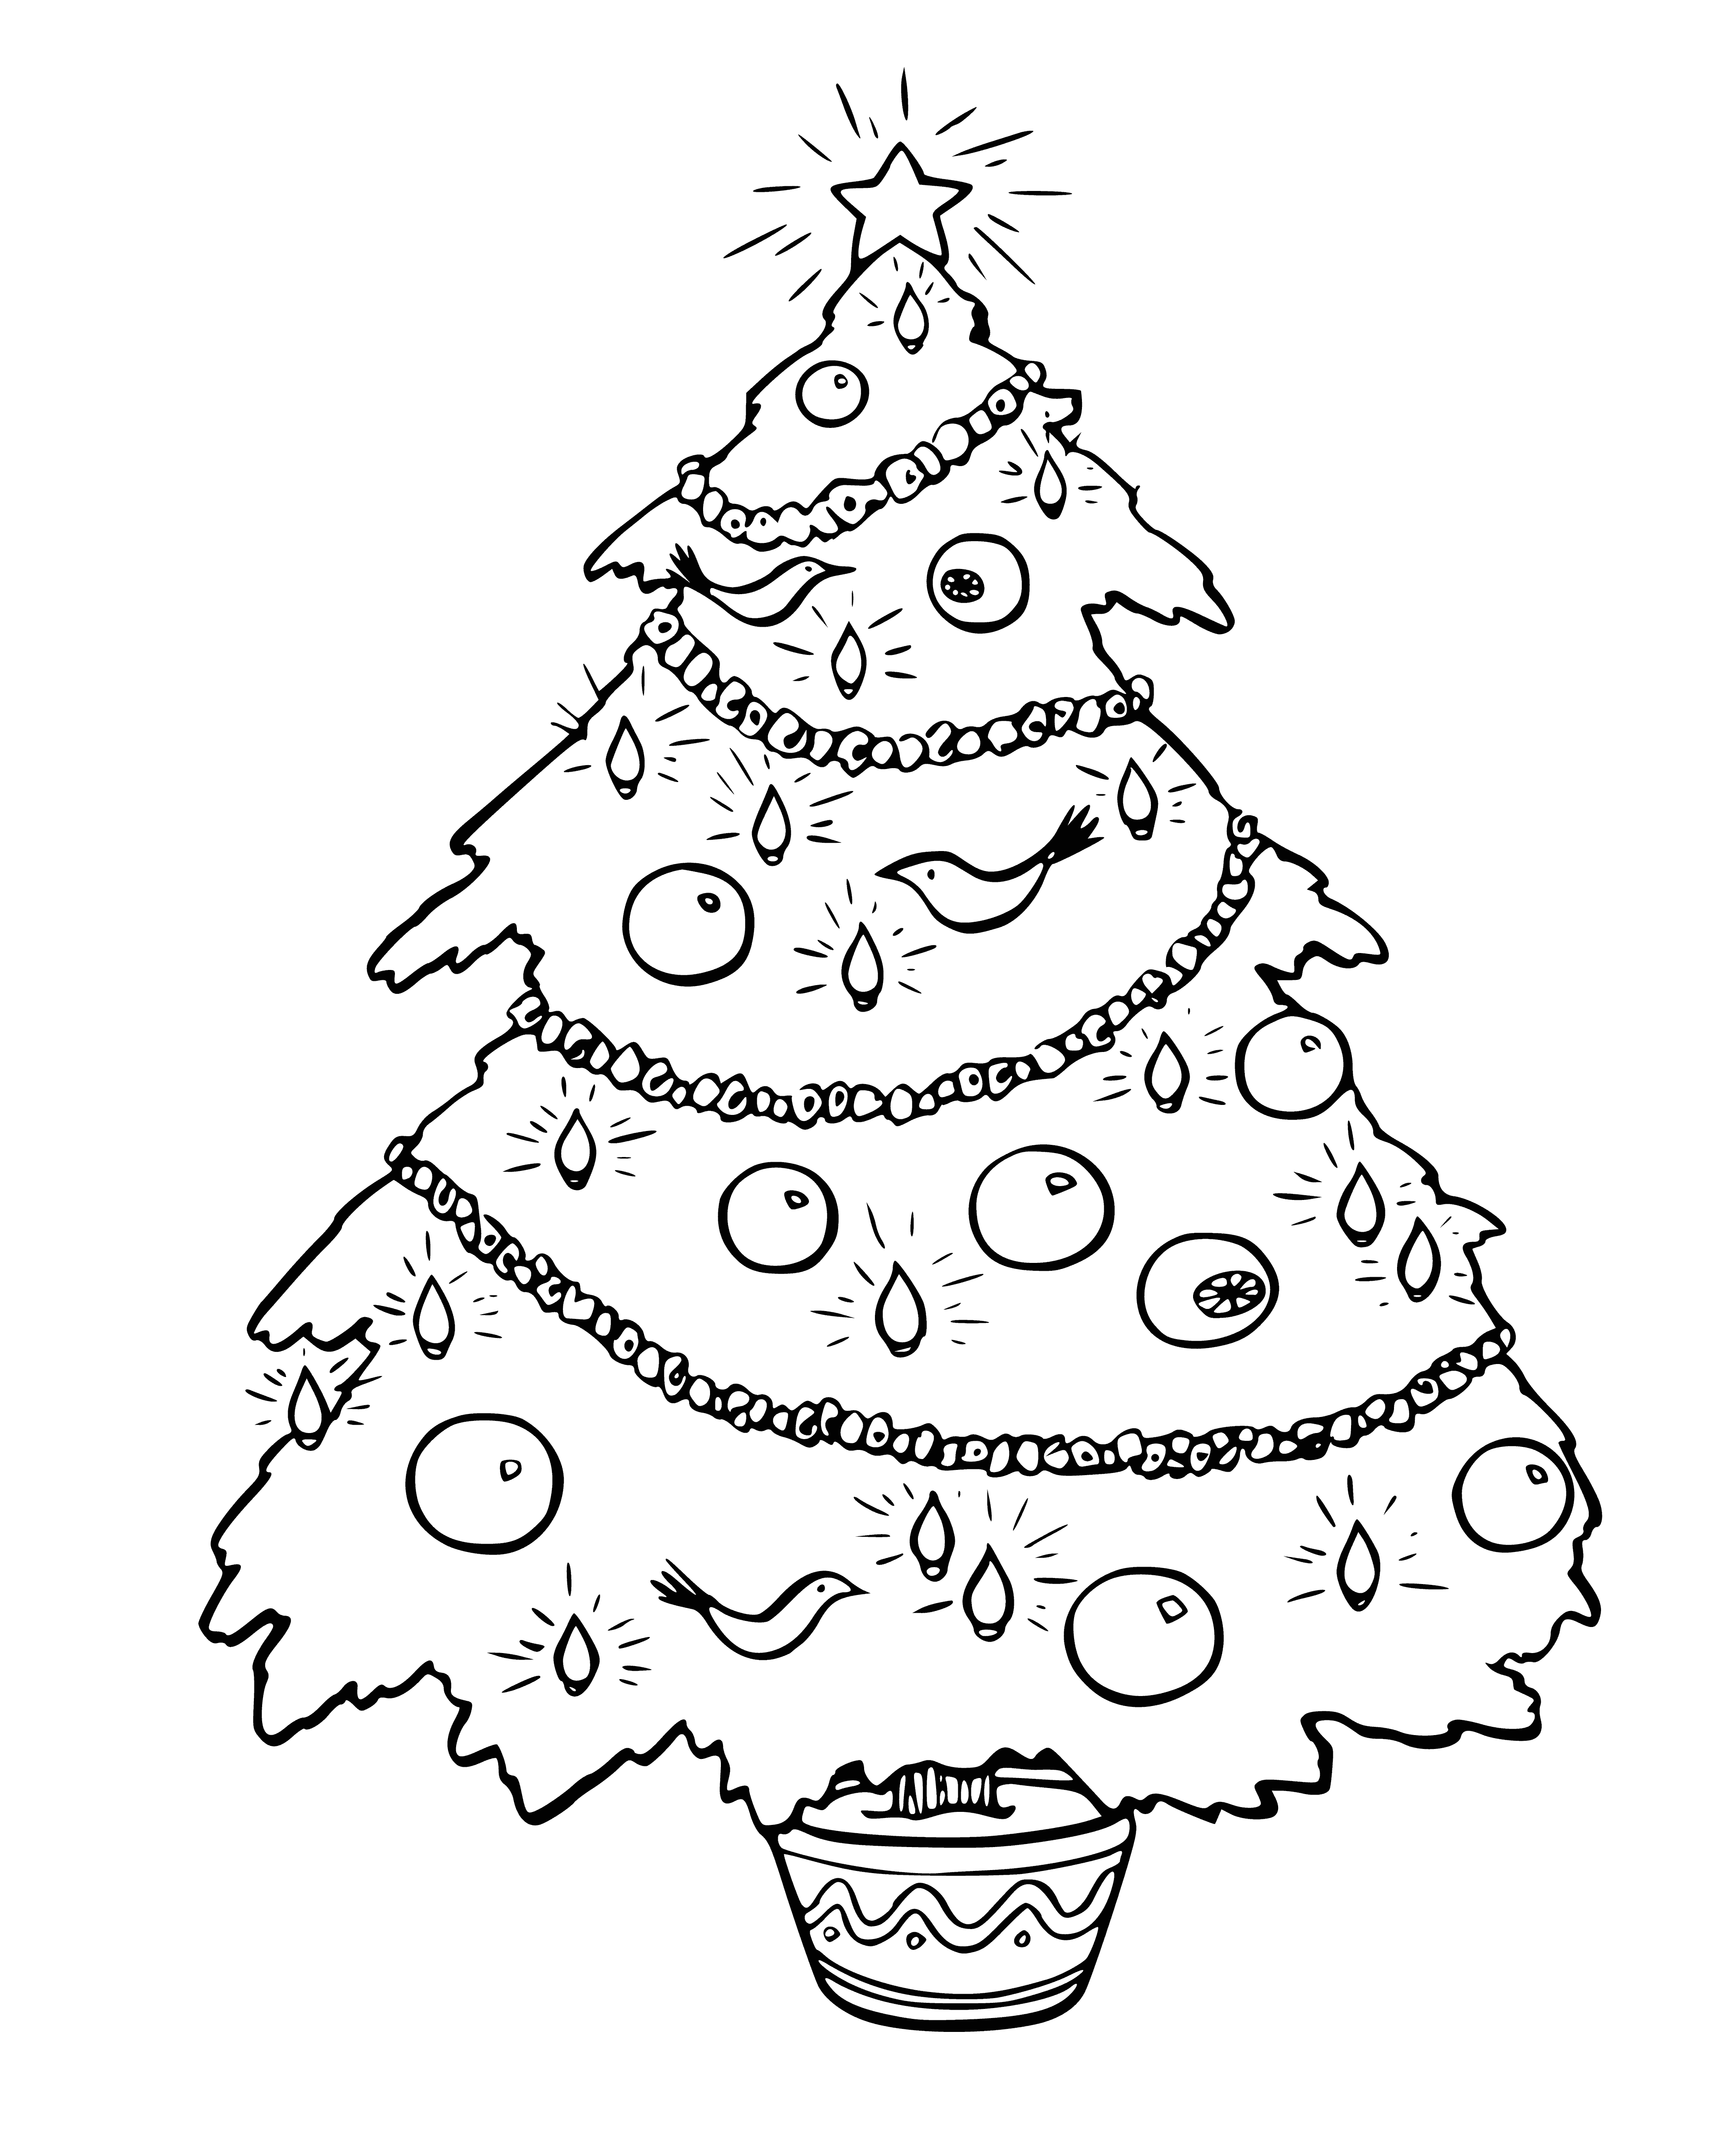 coloring page: A Christmas tree with presents, topped with a star, and a mix of colors.